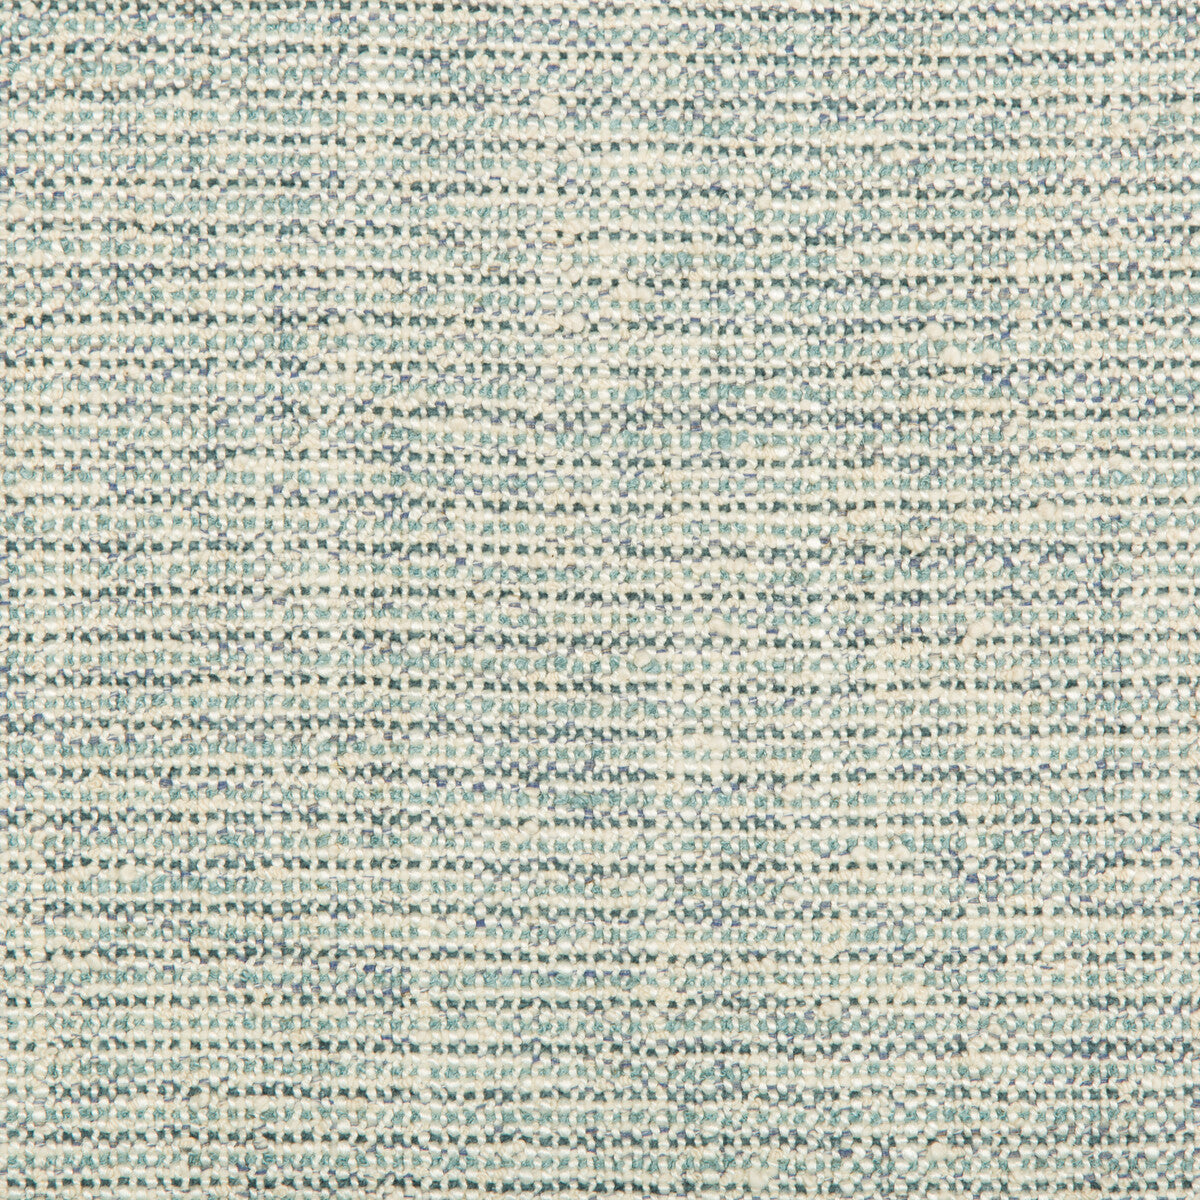 Varona fabric in lagoon color - pattern 2017160.153.0 - by Lee Jofa in the Westport collection